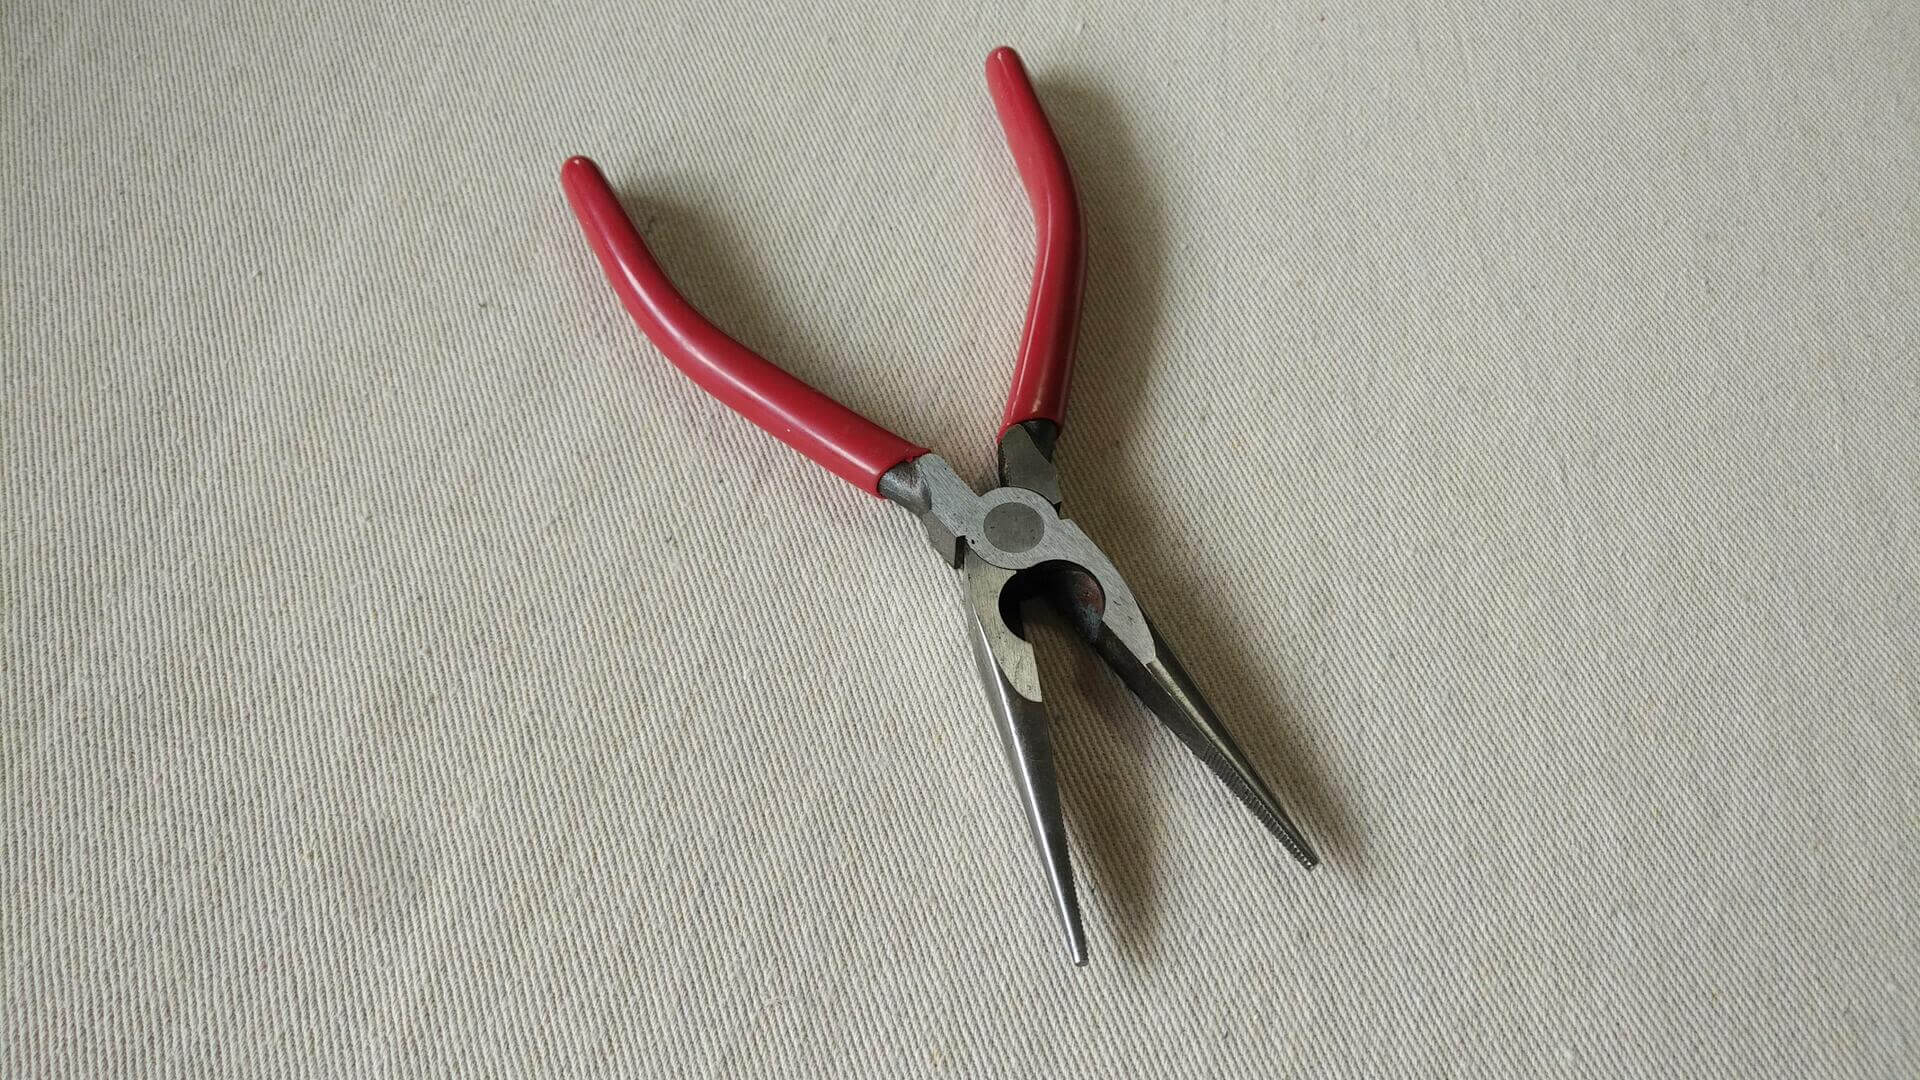 Quality Stanley Challenger vintage long needle nose pliers w cutters and red handle grips. Vintage made in USA collectible electrician & jeweler hand tools